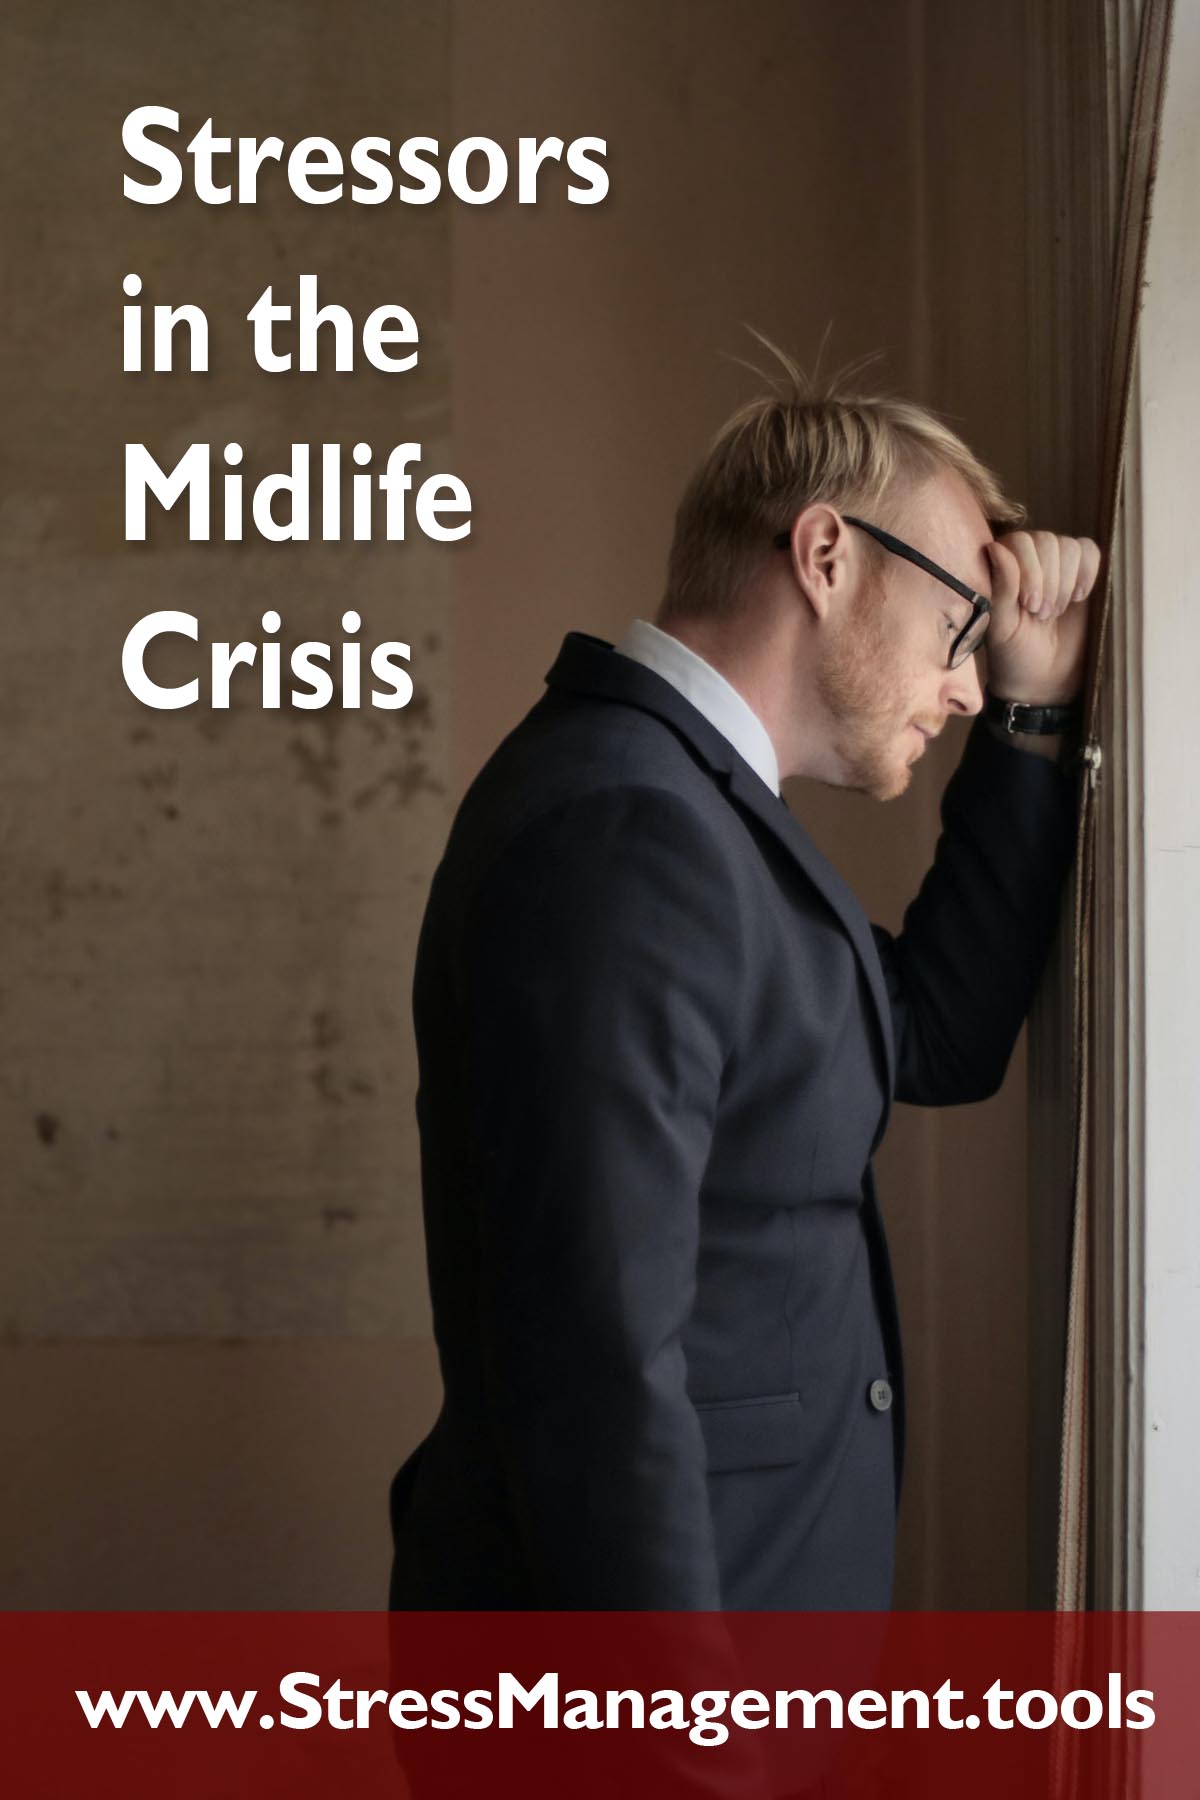 Stressors in the Midlife Crisis